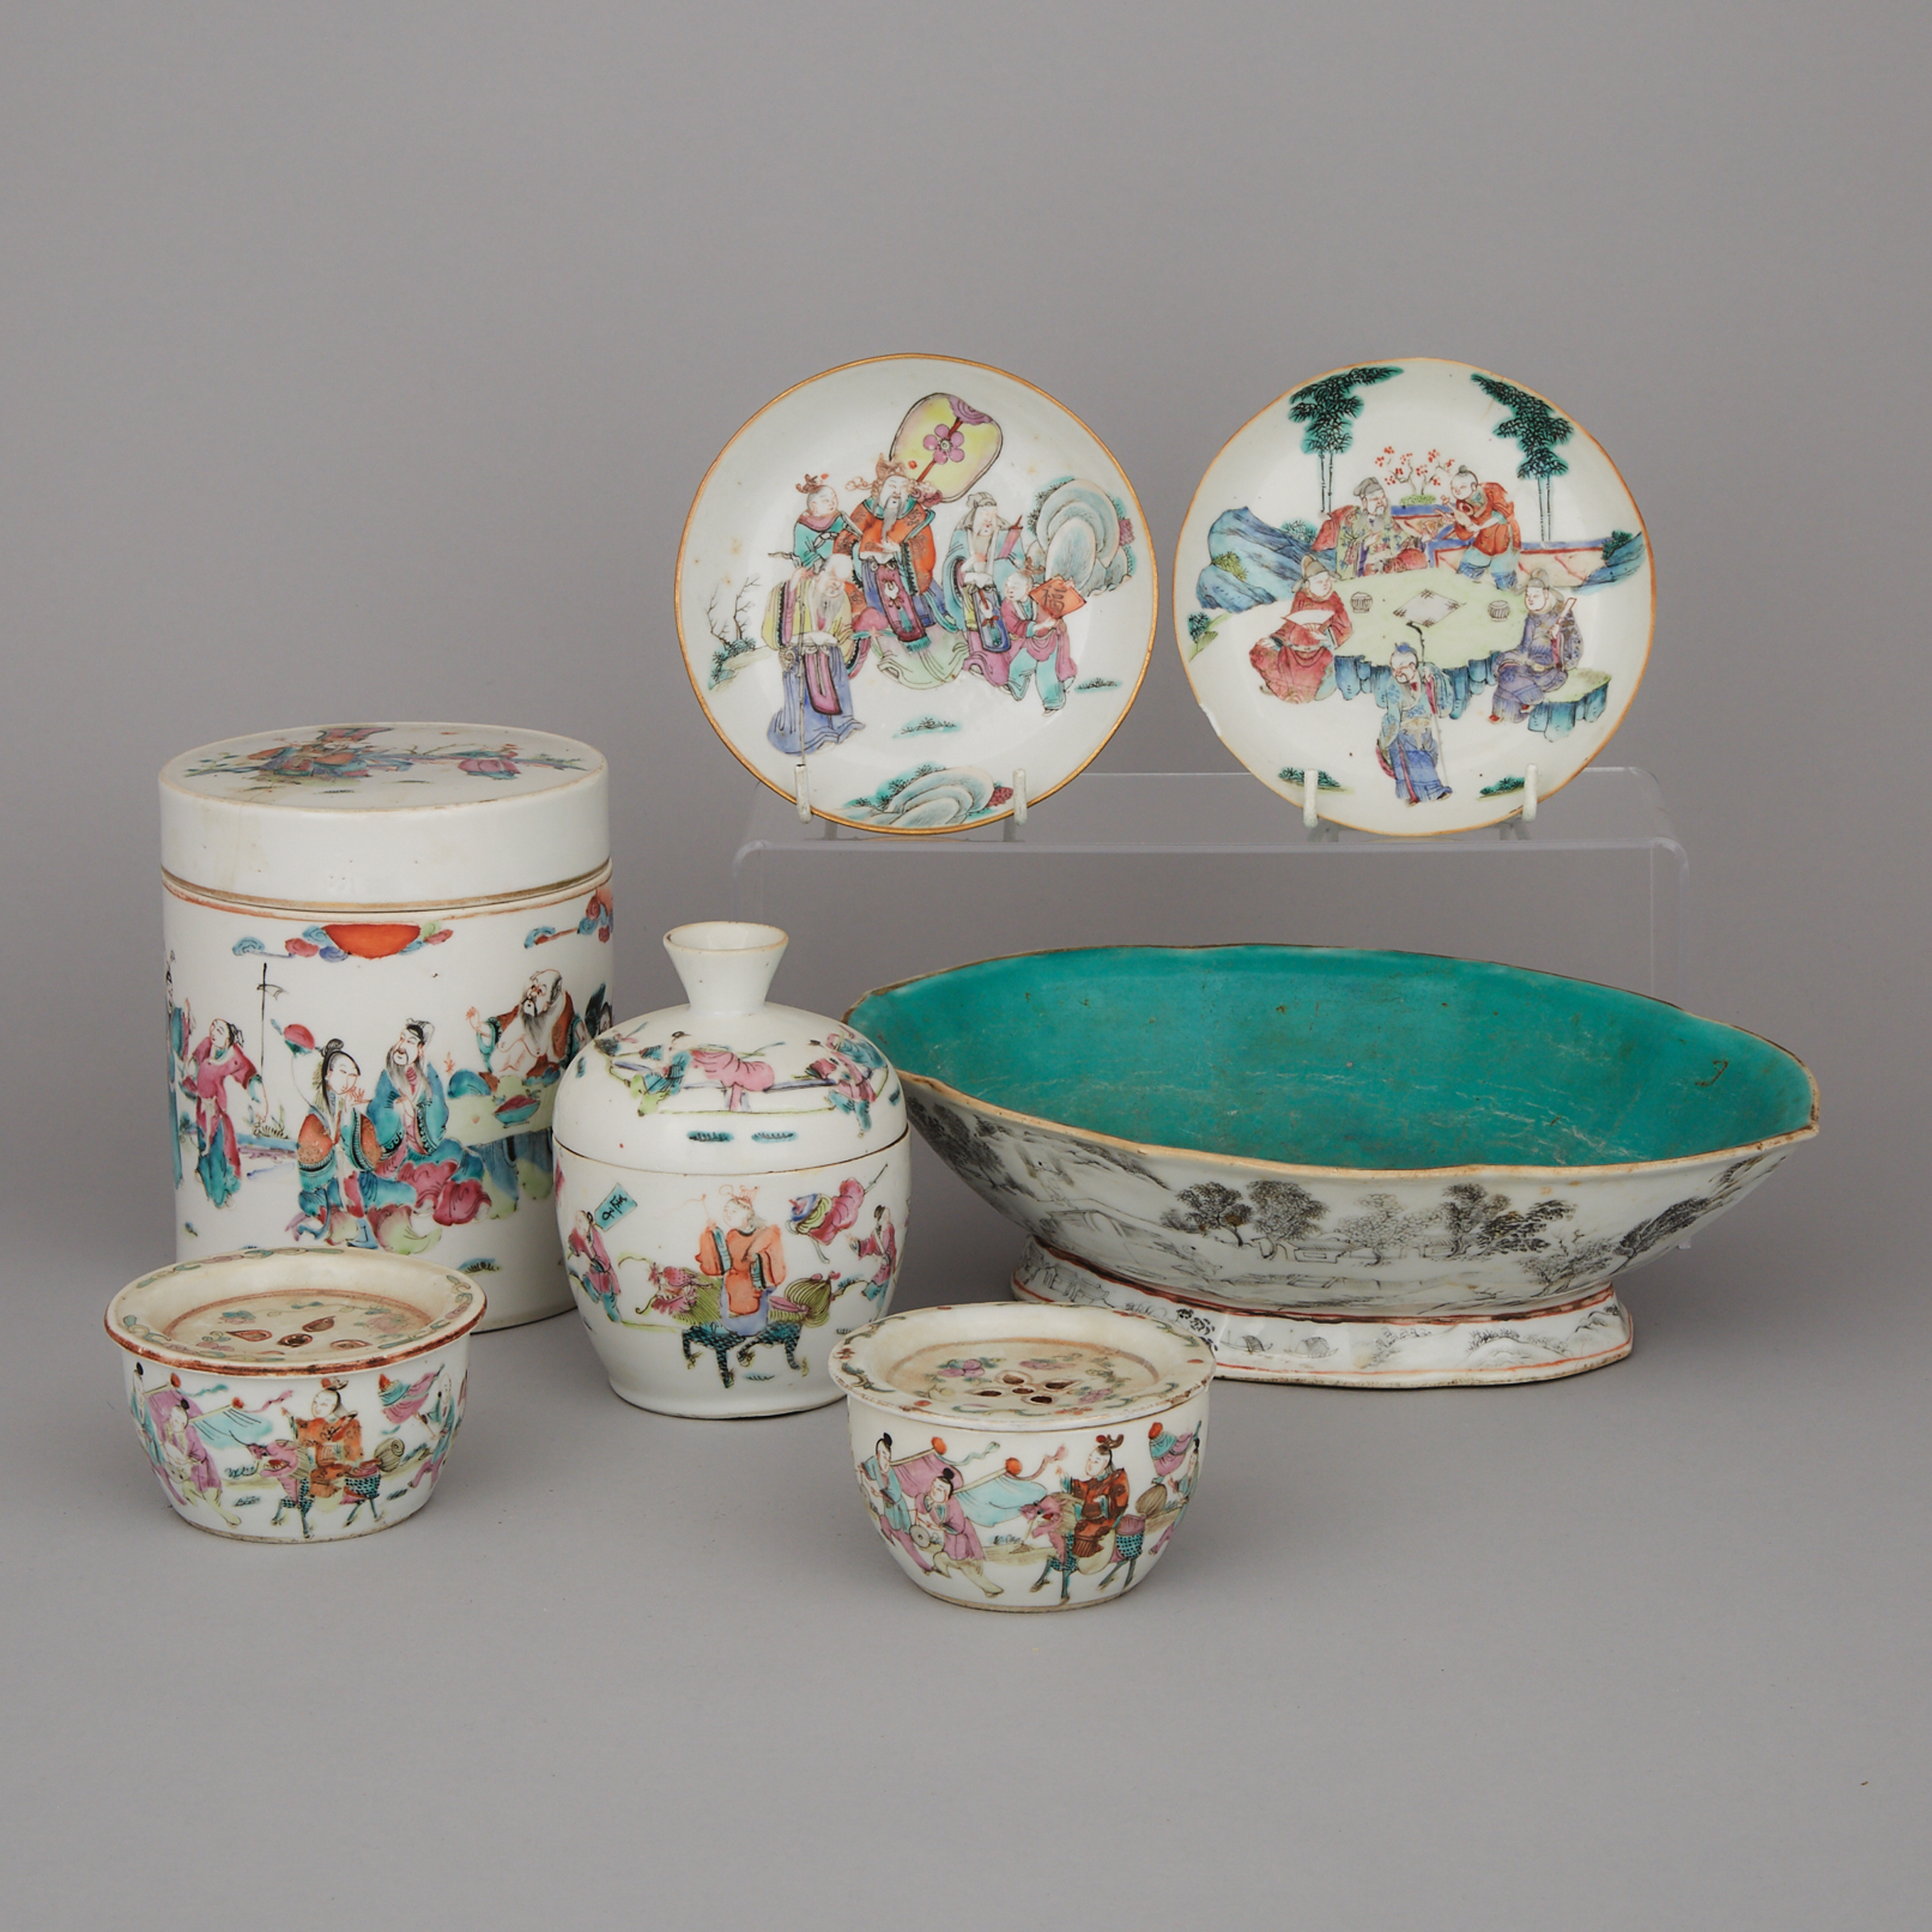 A Group of Seven Famille Rose Wares, Republican Period